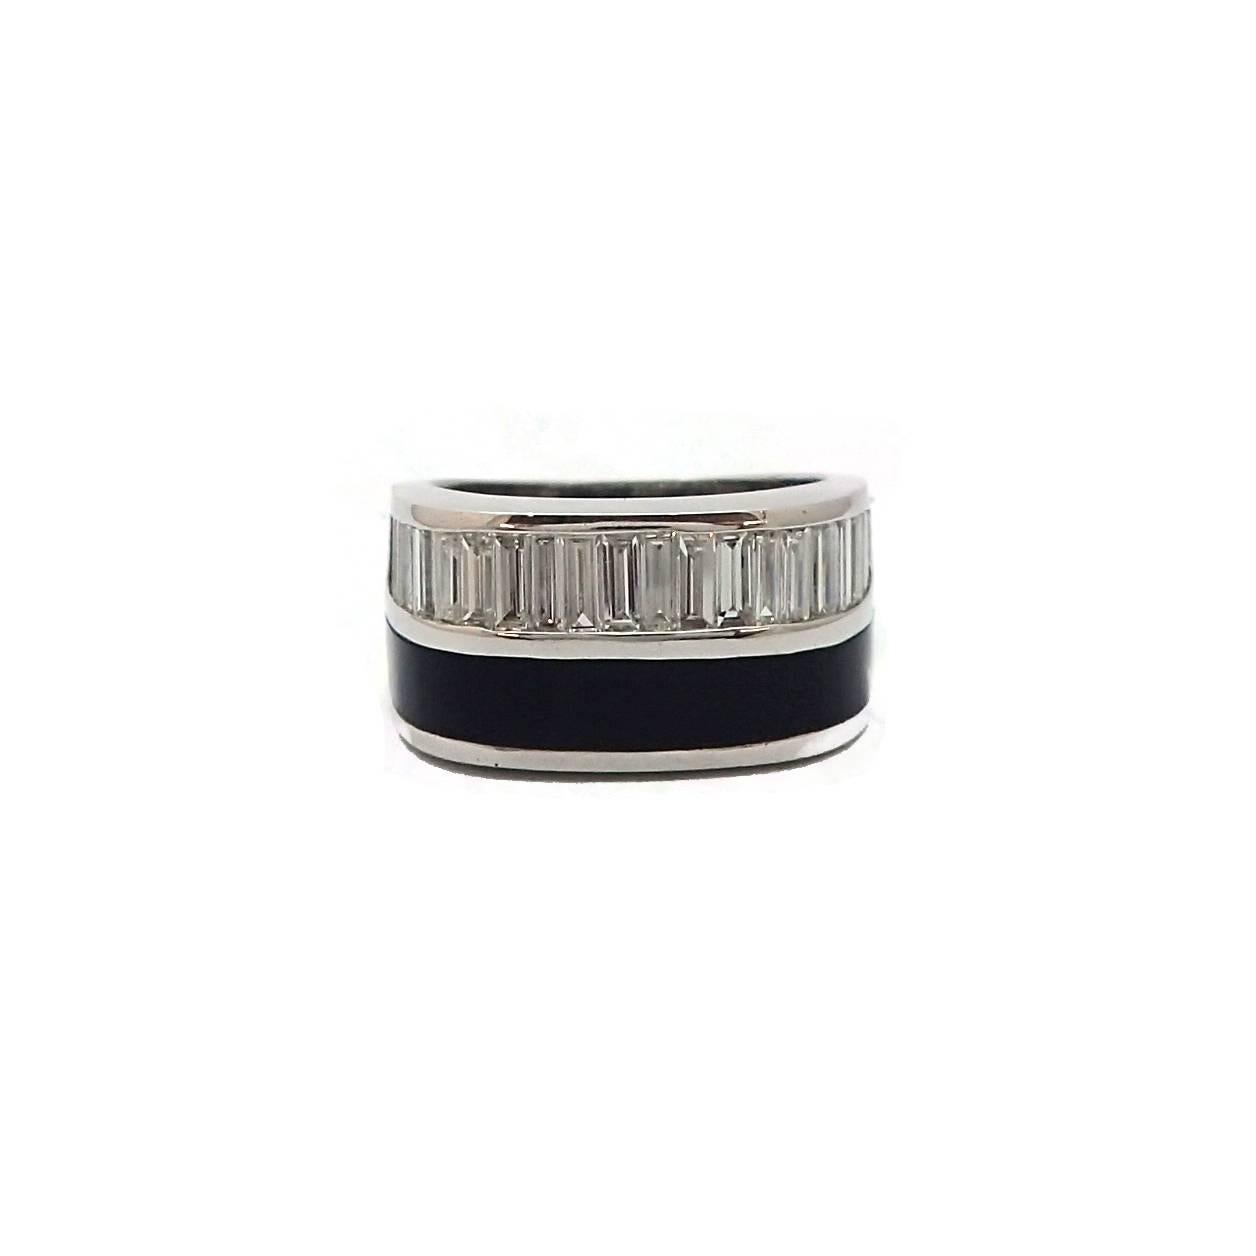 For the edgy, modern man, this onyx and baguette diamond ring is it! The darkness of the onyx contrasts handsomely with the sparkle of the diamonds, making this the perfect statement piece for any man. This ring features 23 baguette diamonds for a